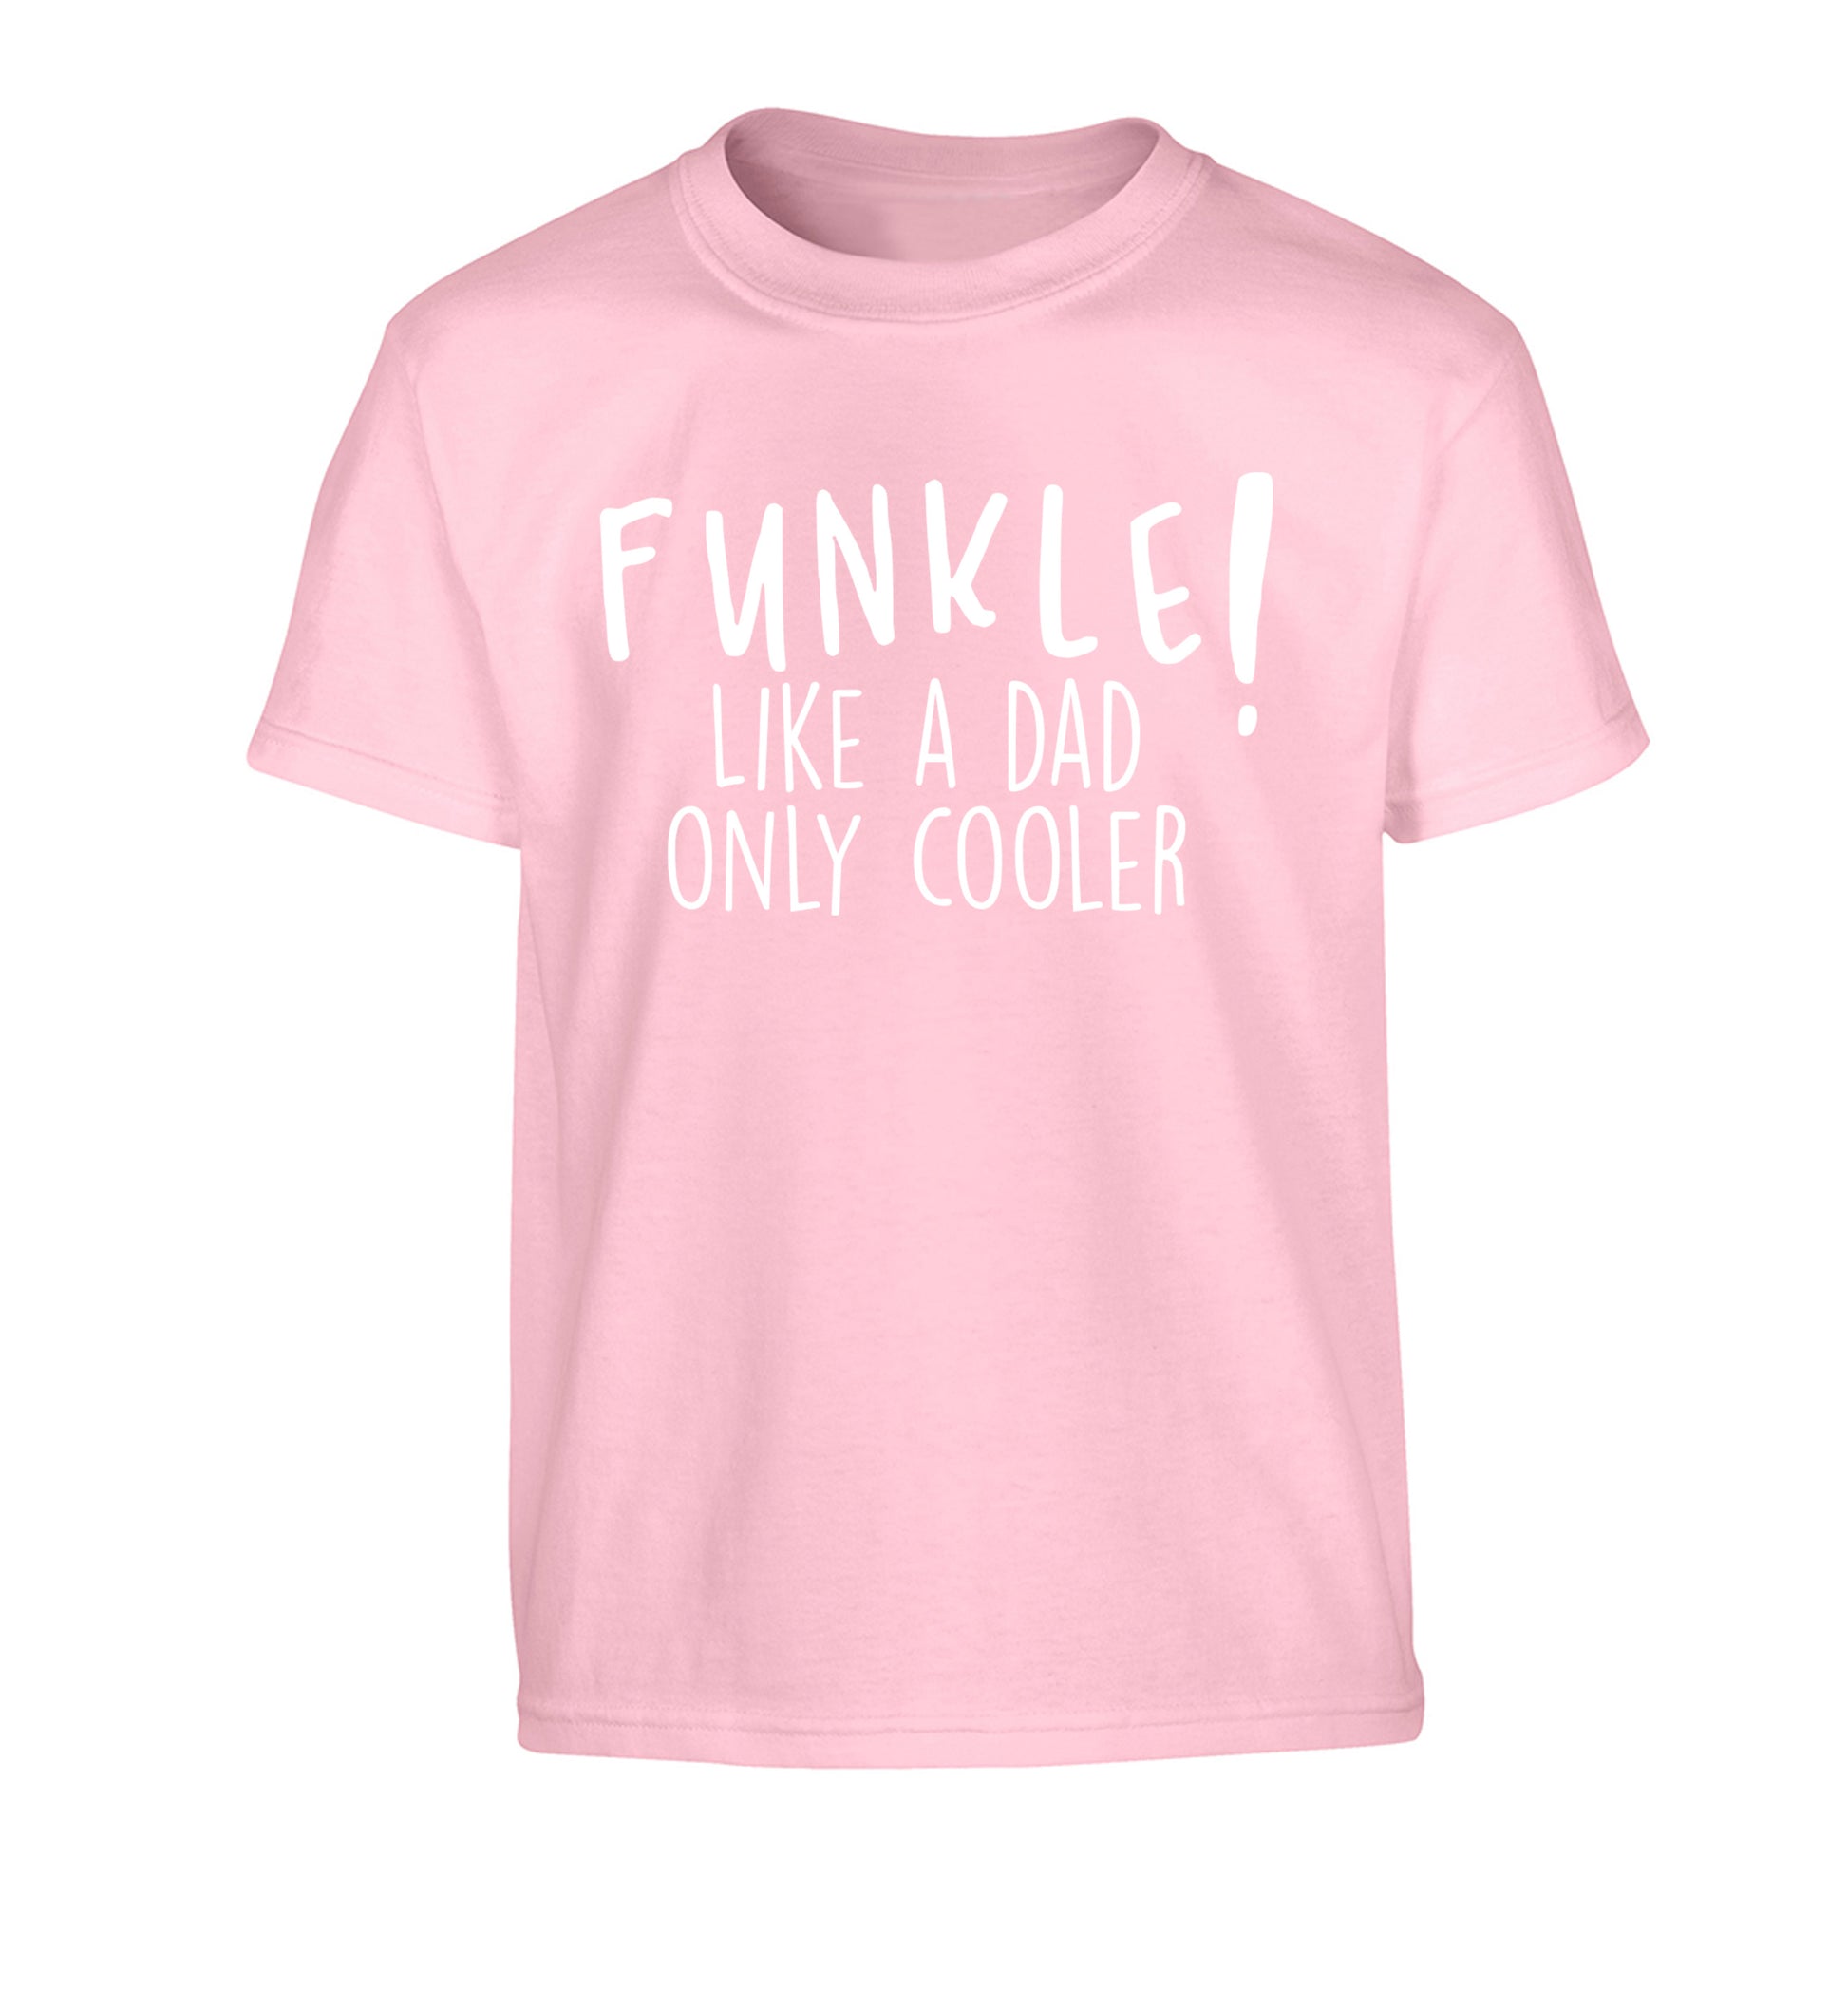 Funkle Like a Dad Only Cooler Children's light pink Tshirt 12-13 Years